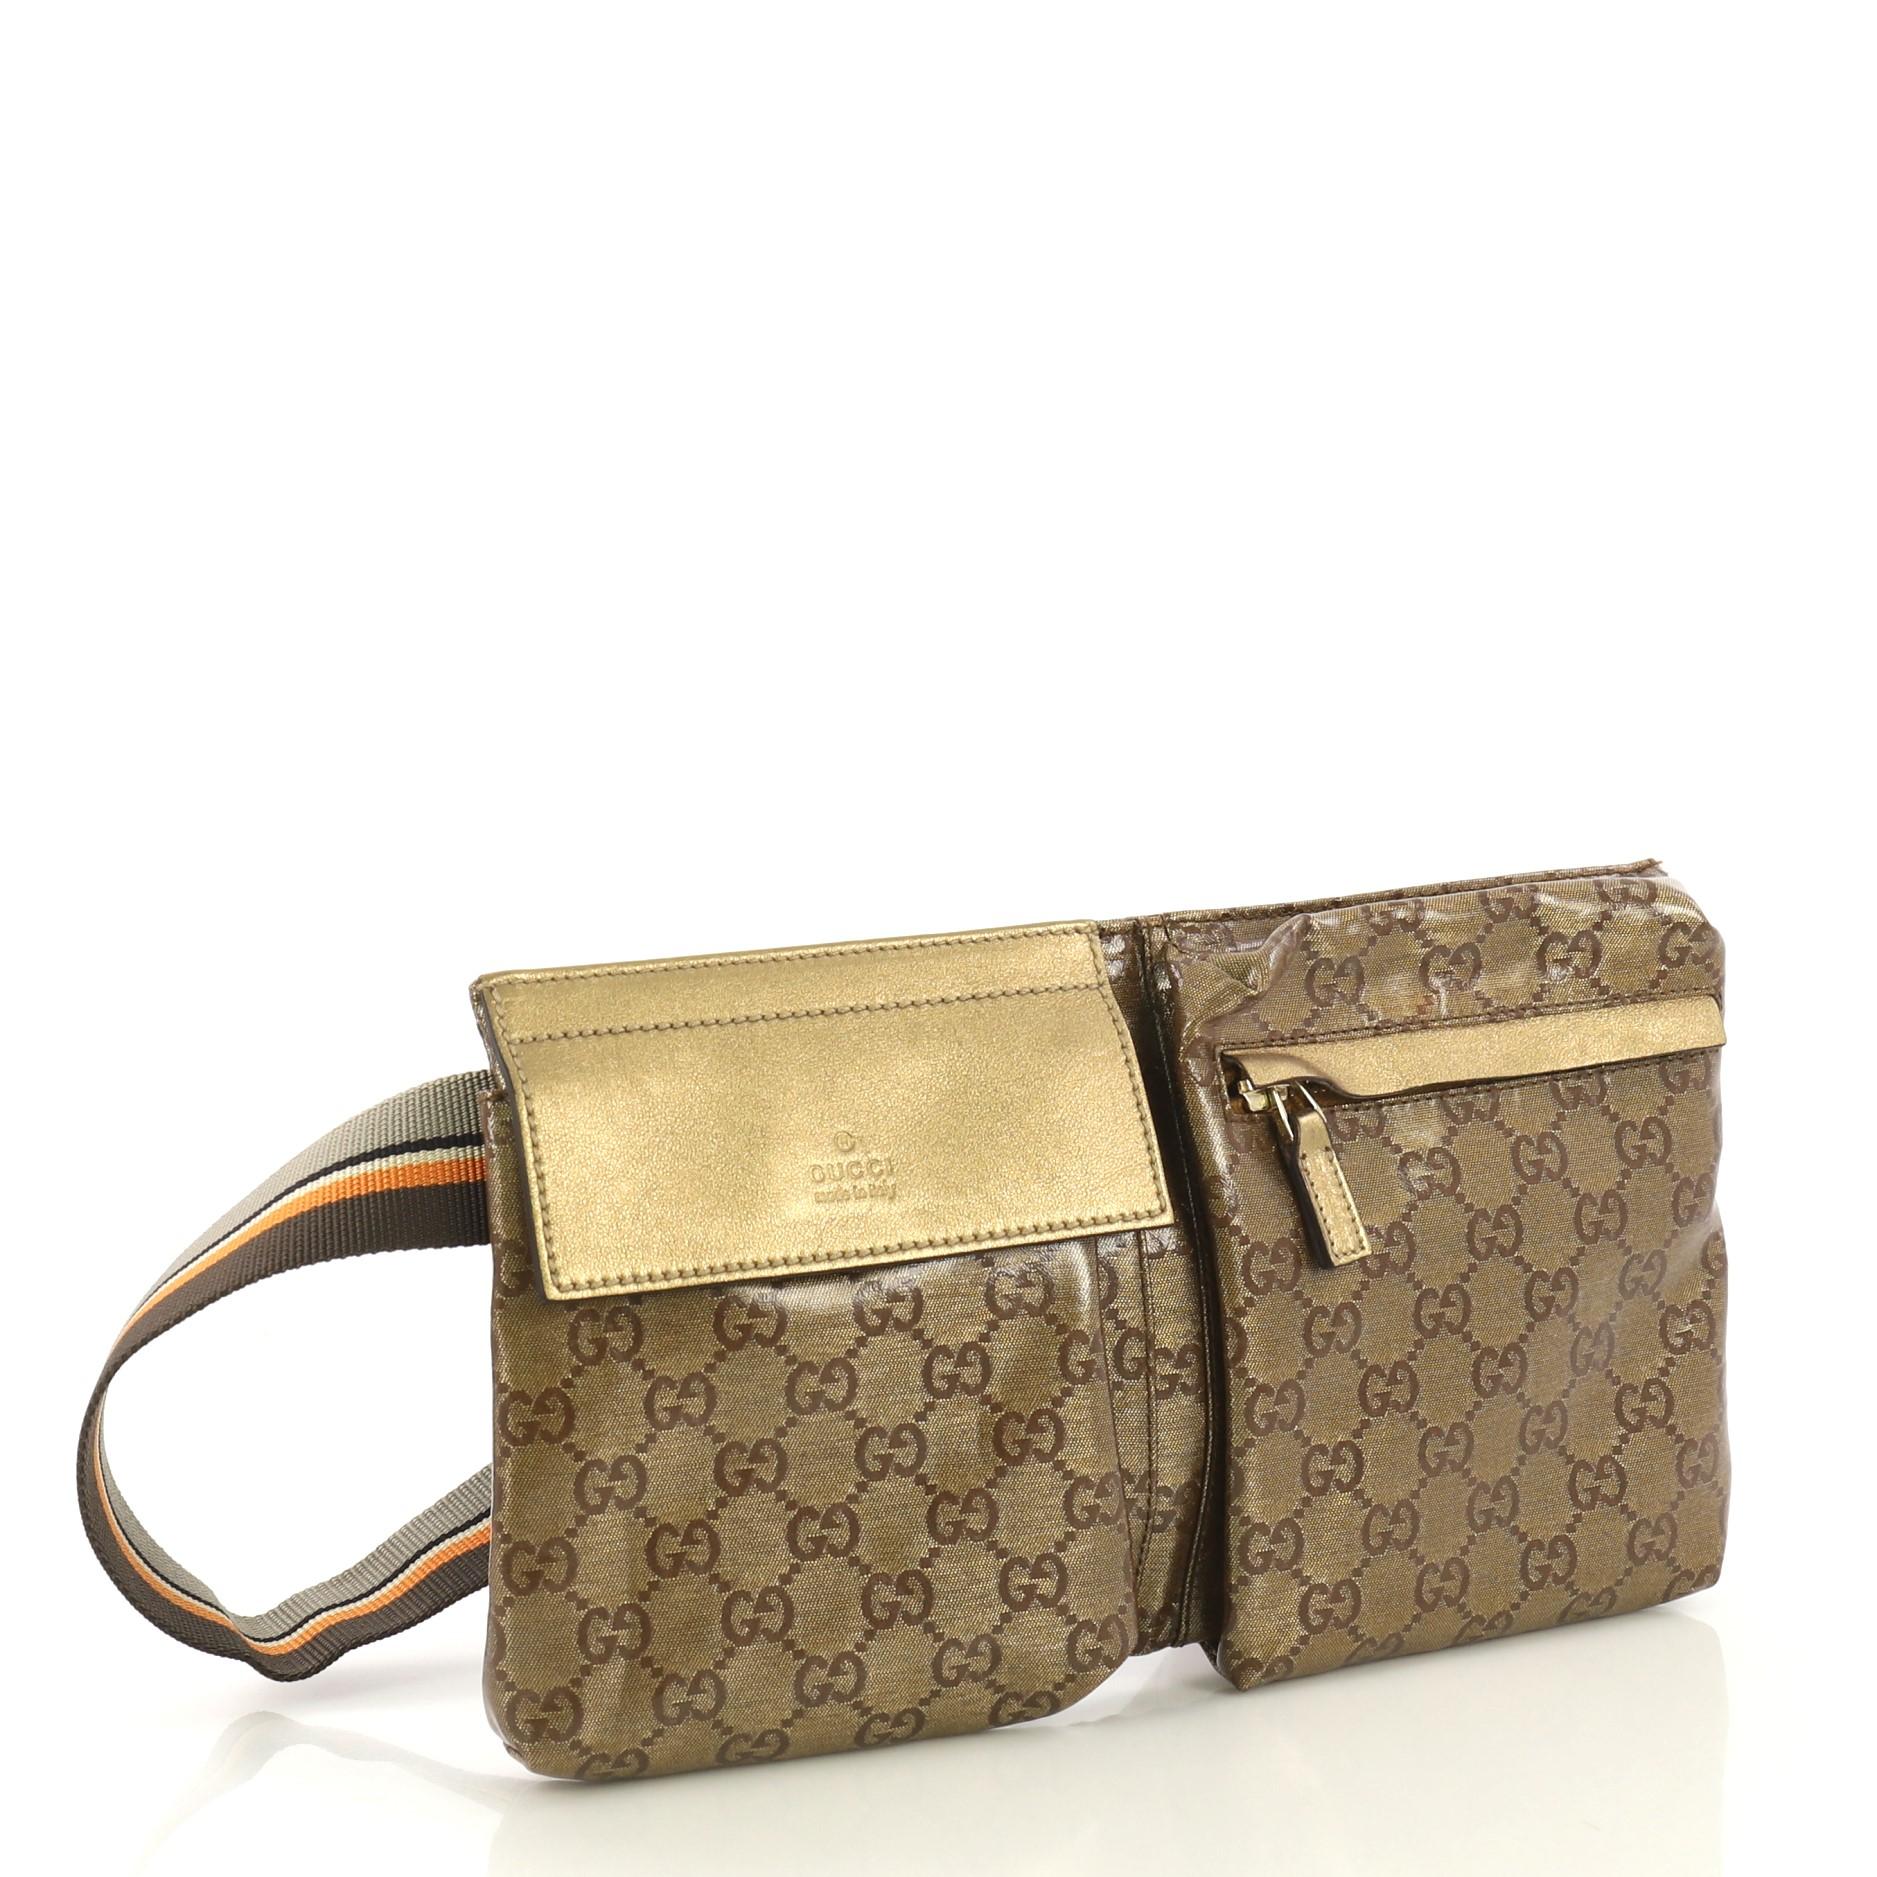 This Gucci Vintage Double Belt Bag GG Coated Canvas, crafted in gold metallic GG coated canvas, features an adjustable textile strap, front zip and snap pockets, and gold-tone hardware. Its zip closure opens to a brown fabric interior. 

Condition: